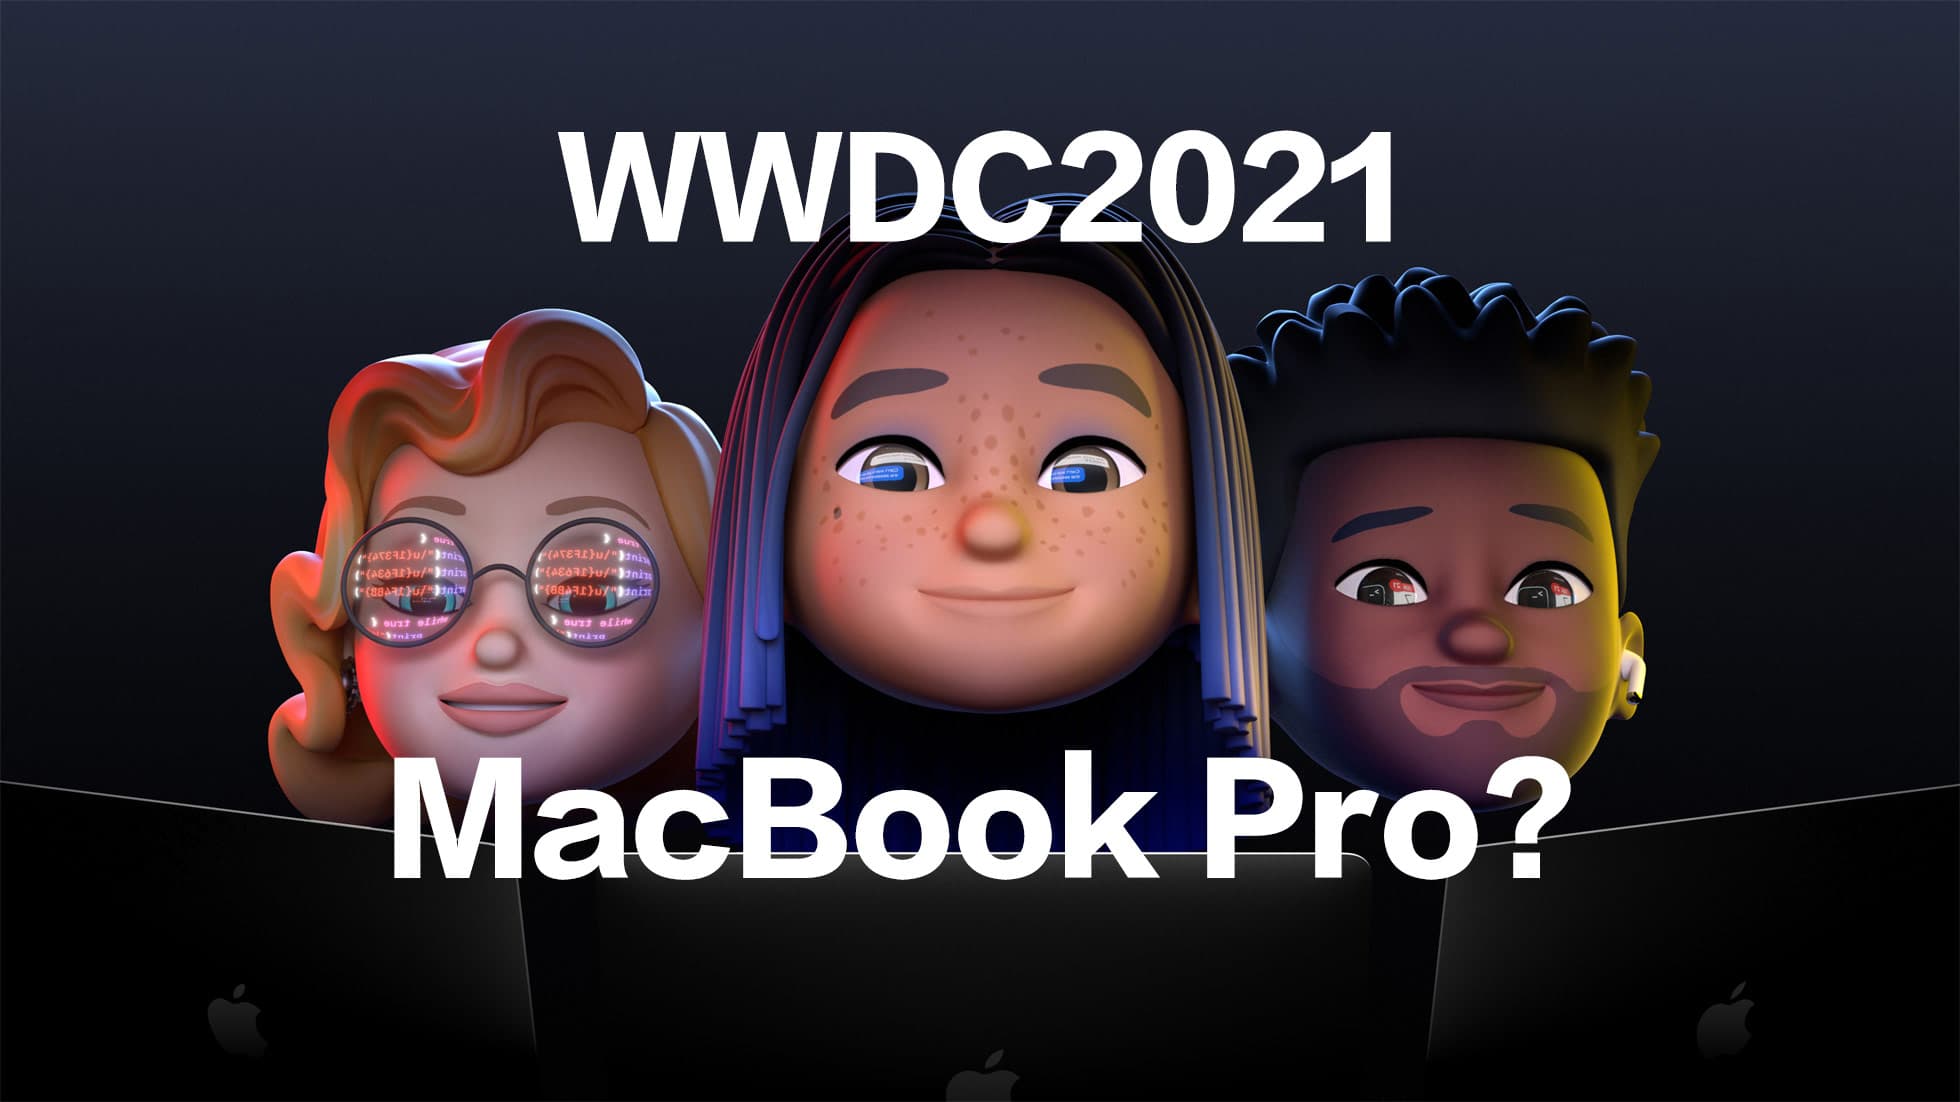 apple wwdc 2021 hints about the new macbook pro